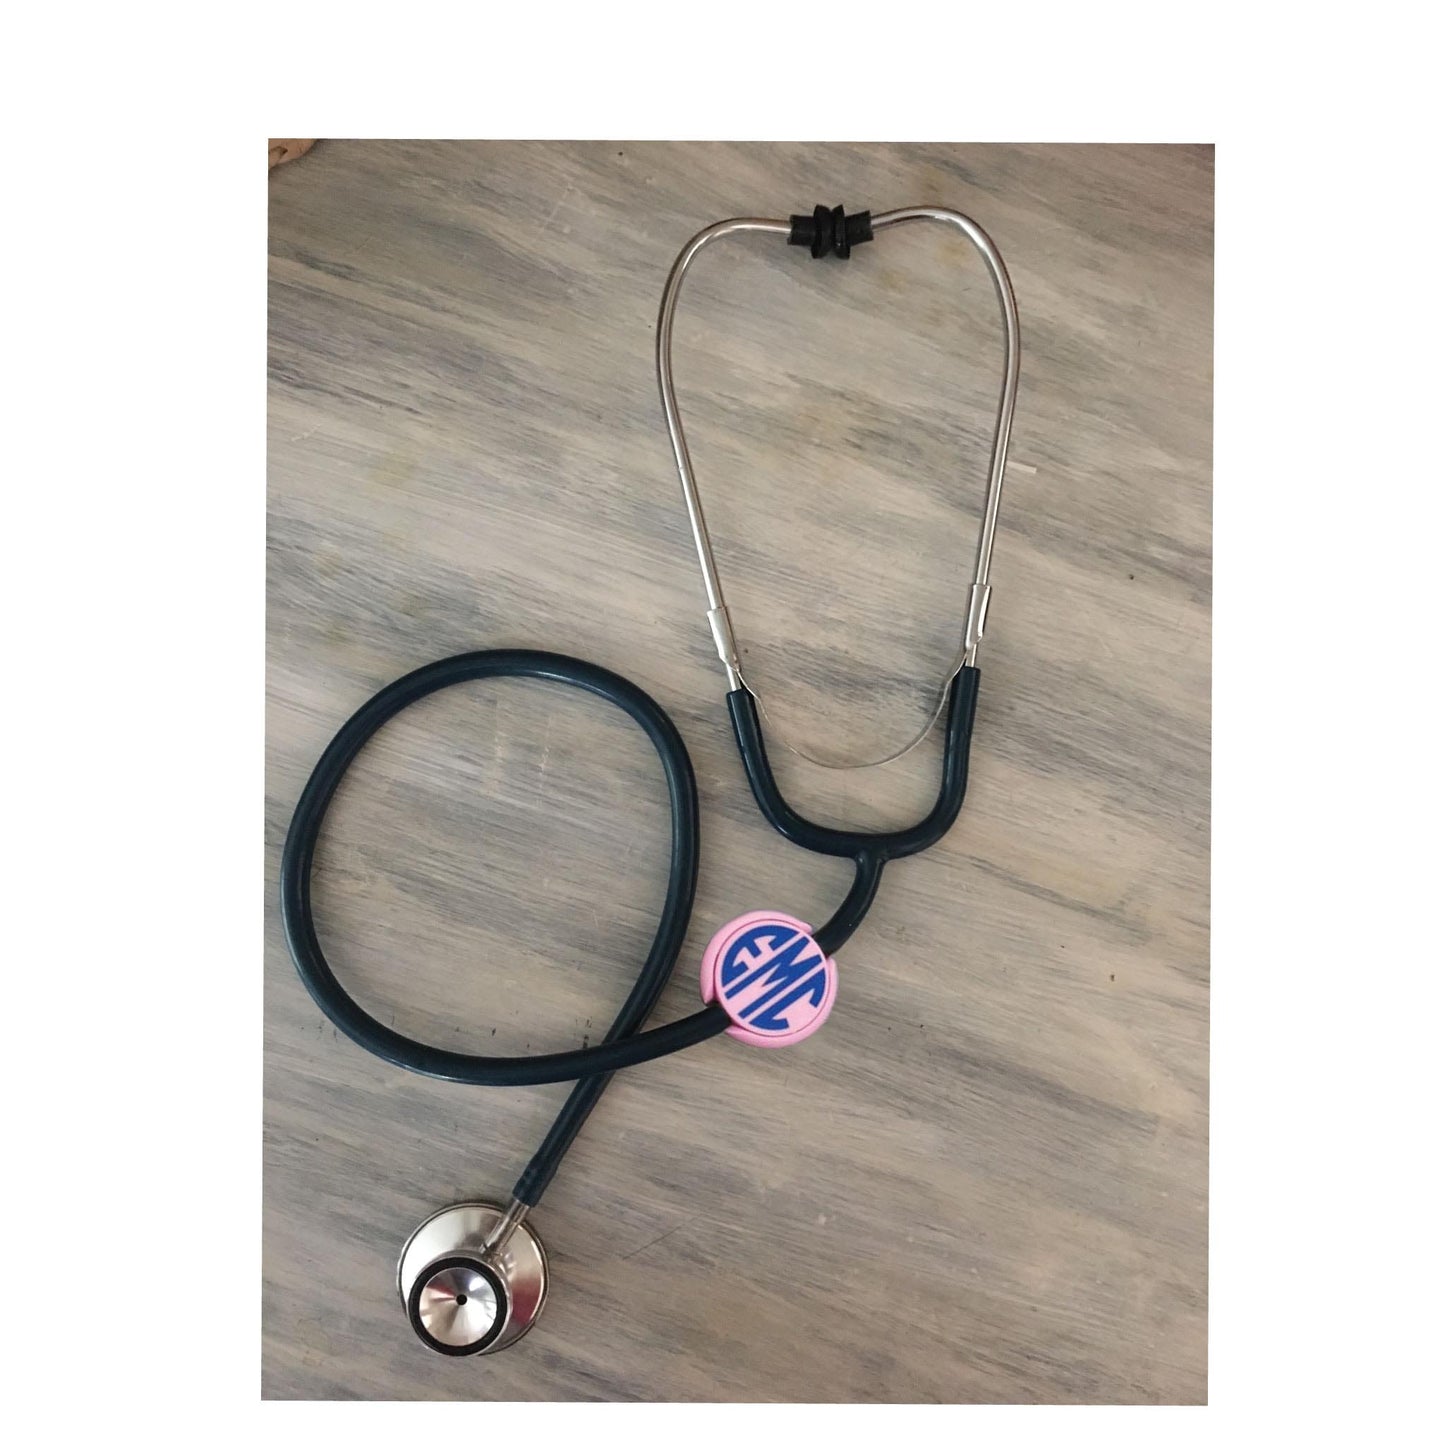 Personalized Stethoscope Clips